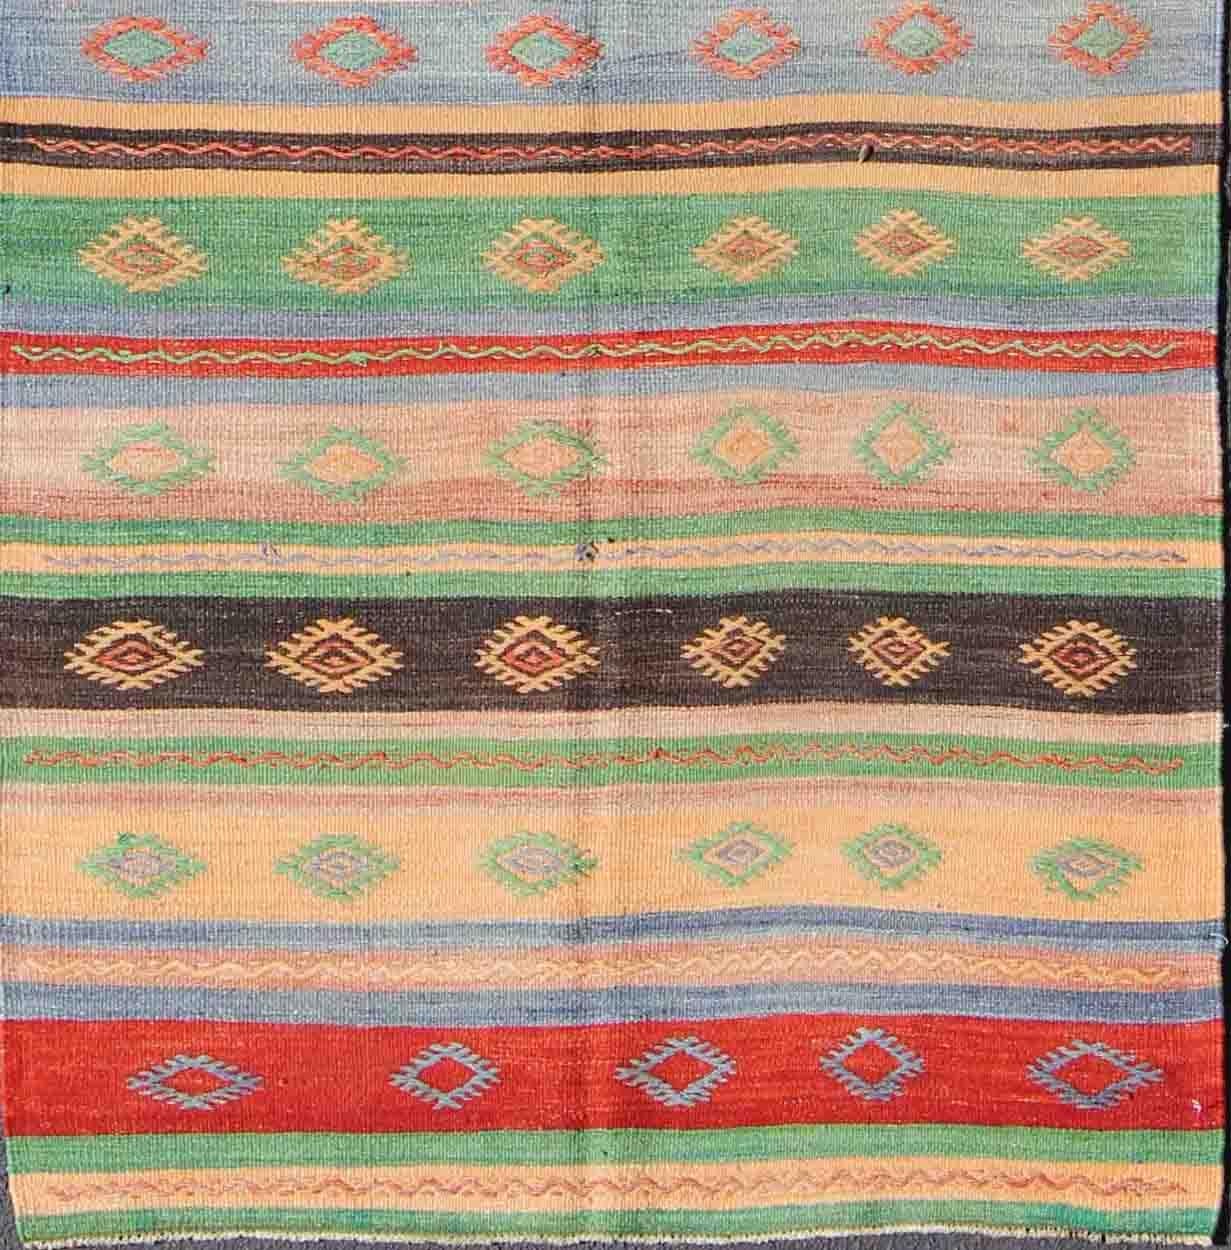 Featuring tribal shapes with a spotted and speckled assortment of geometric elements, rendered in a repeating stripe design, this unique Mid-Century Kilim showcases an array of colorful tones, including green, light blue, sand, charcoal and